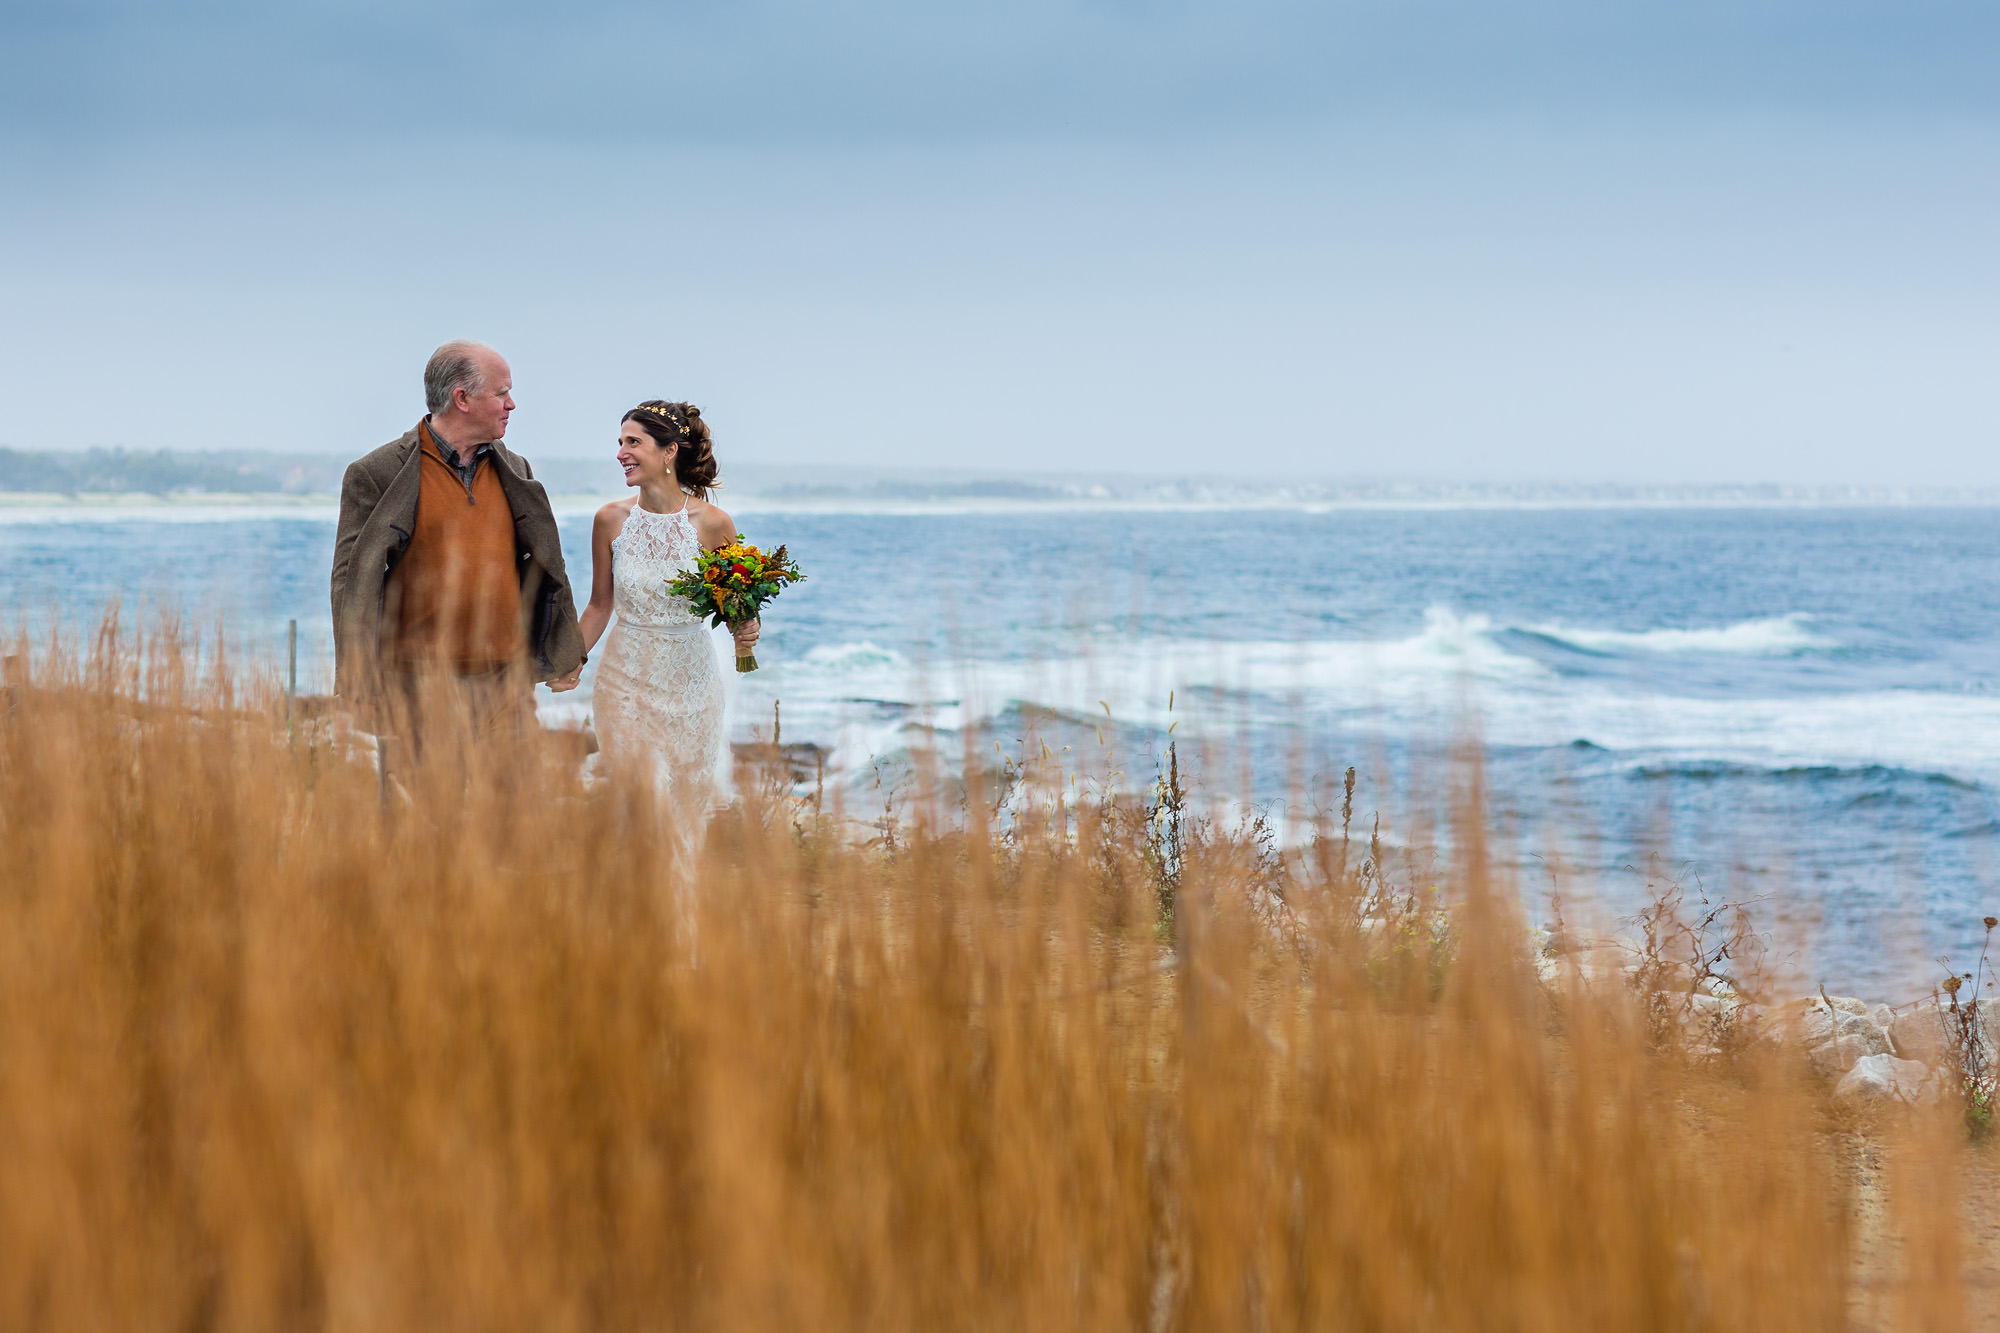 Jamey and Tom's wedding portraits on the Marginal Way in Ogunquit, Maine